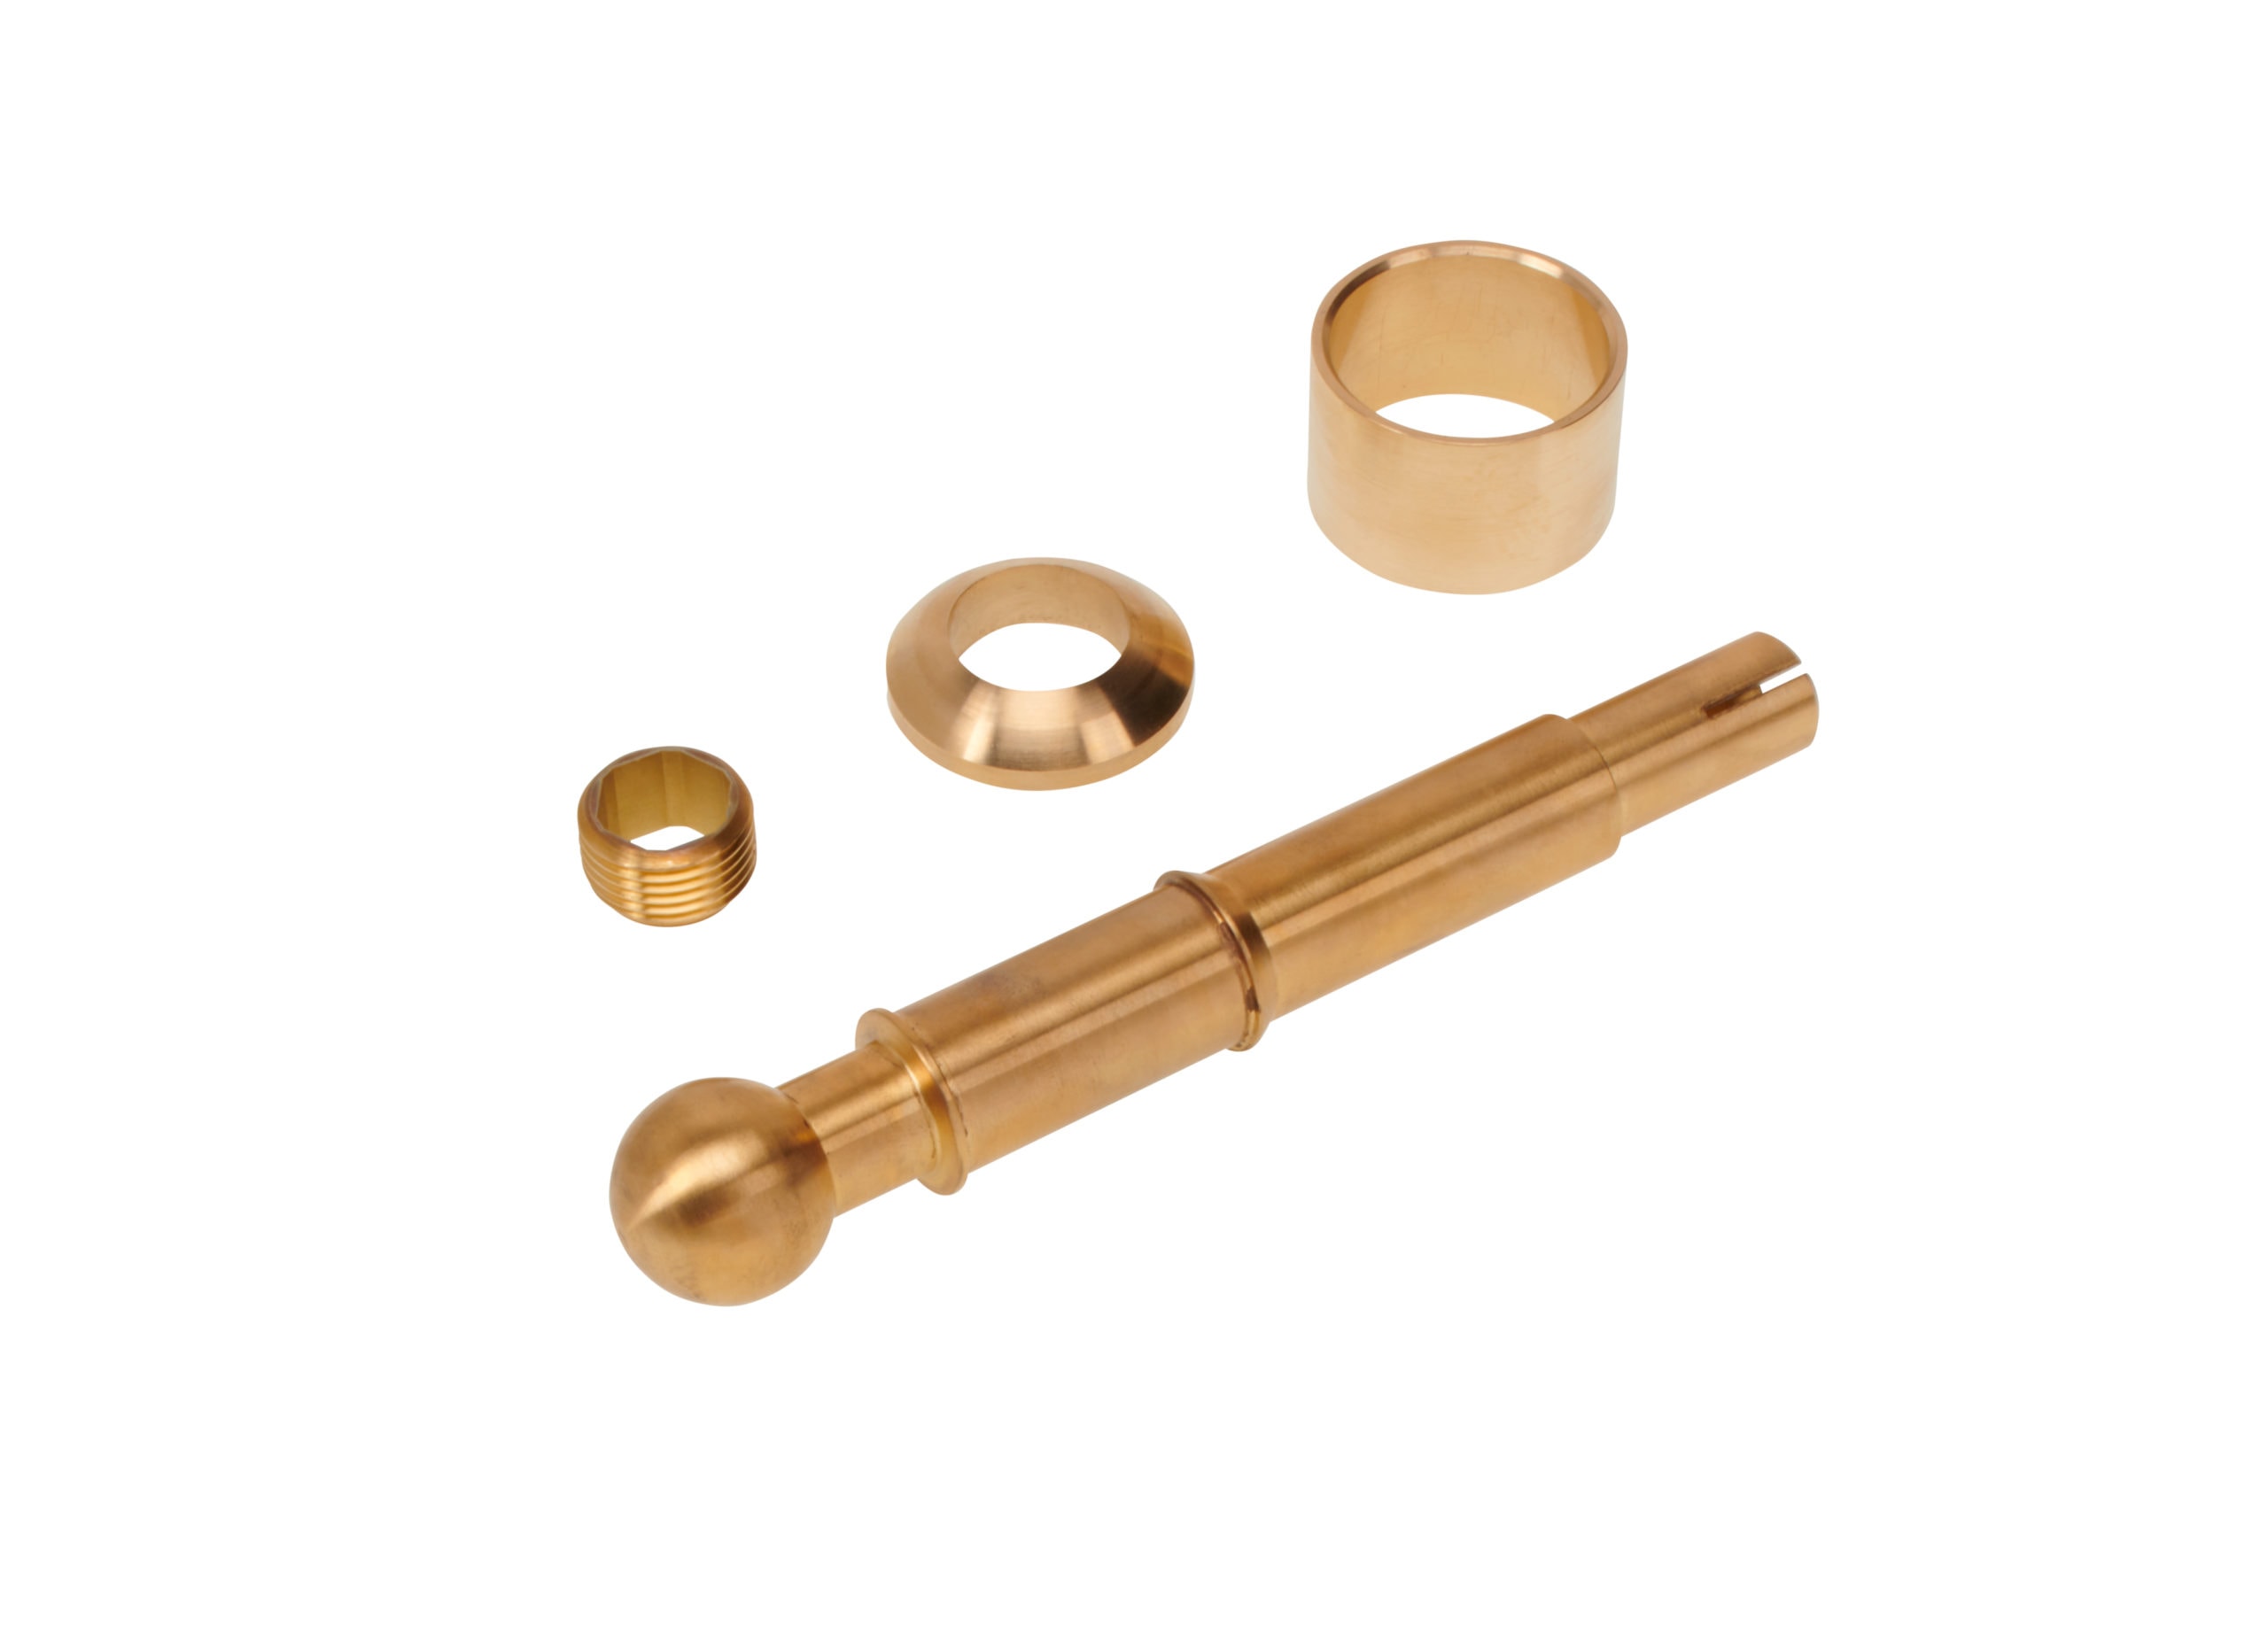 Brass CNC Turned Parts - CNC Turning Services